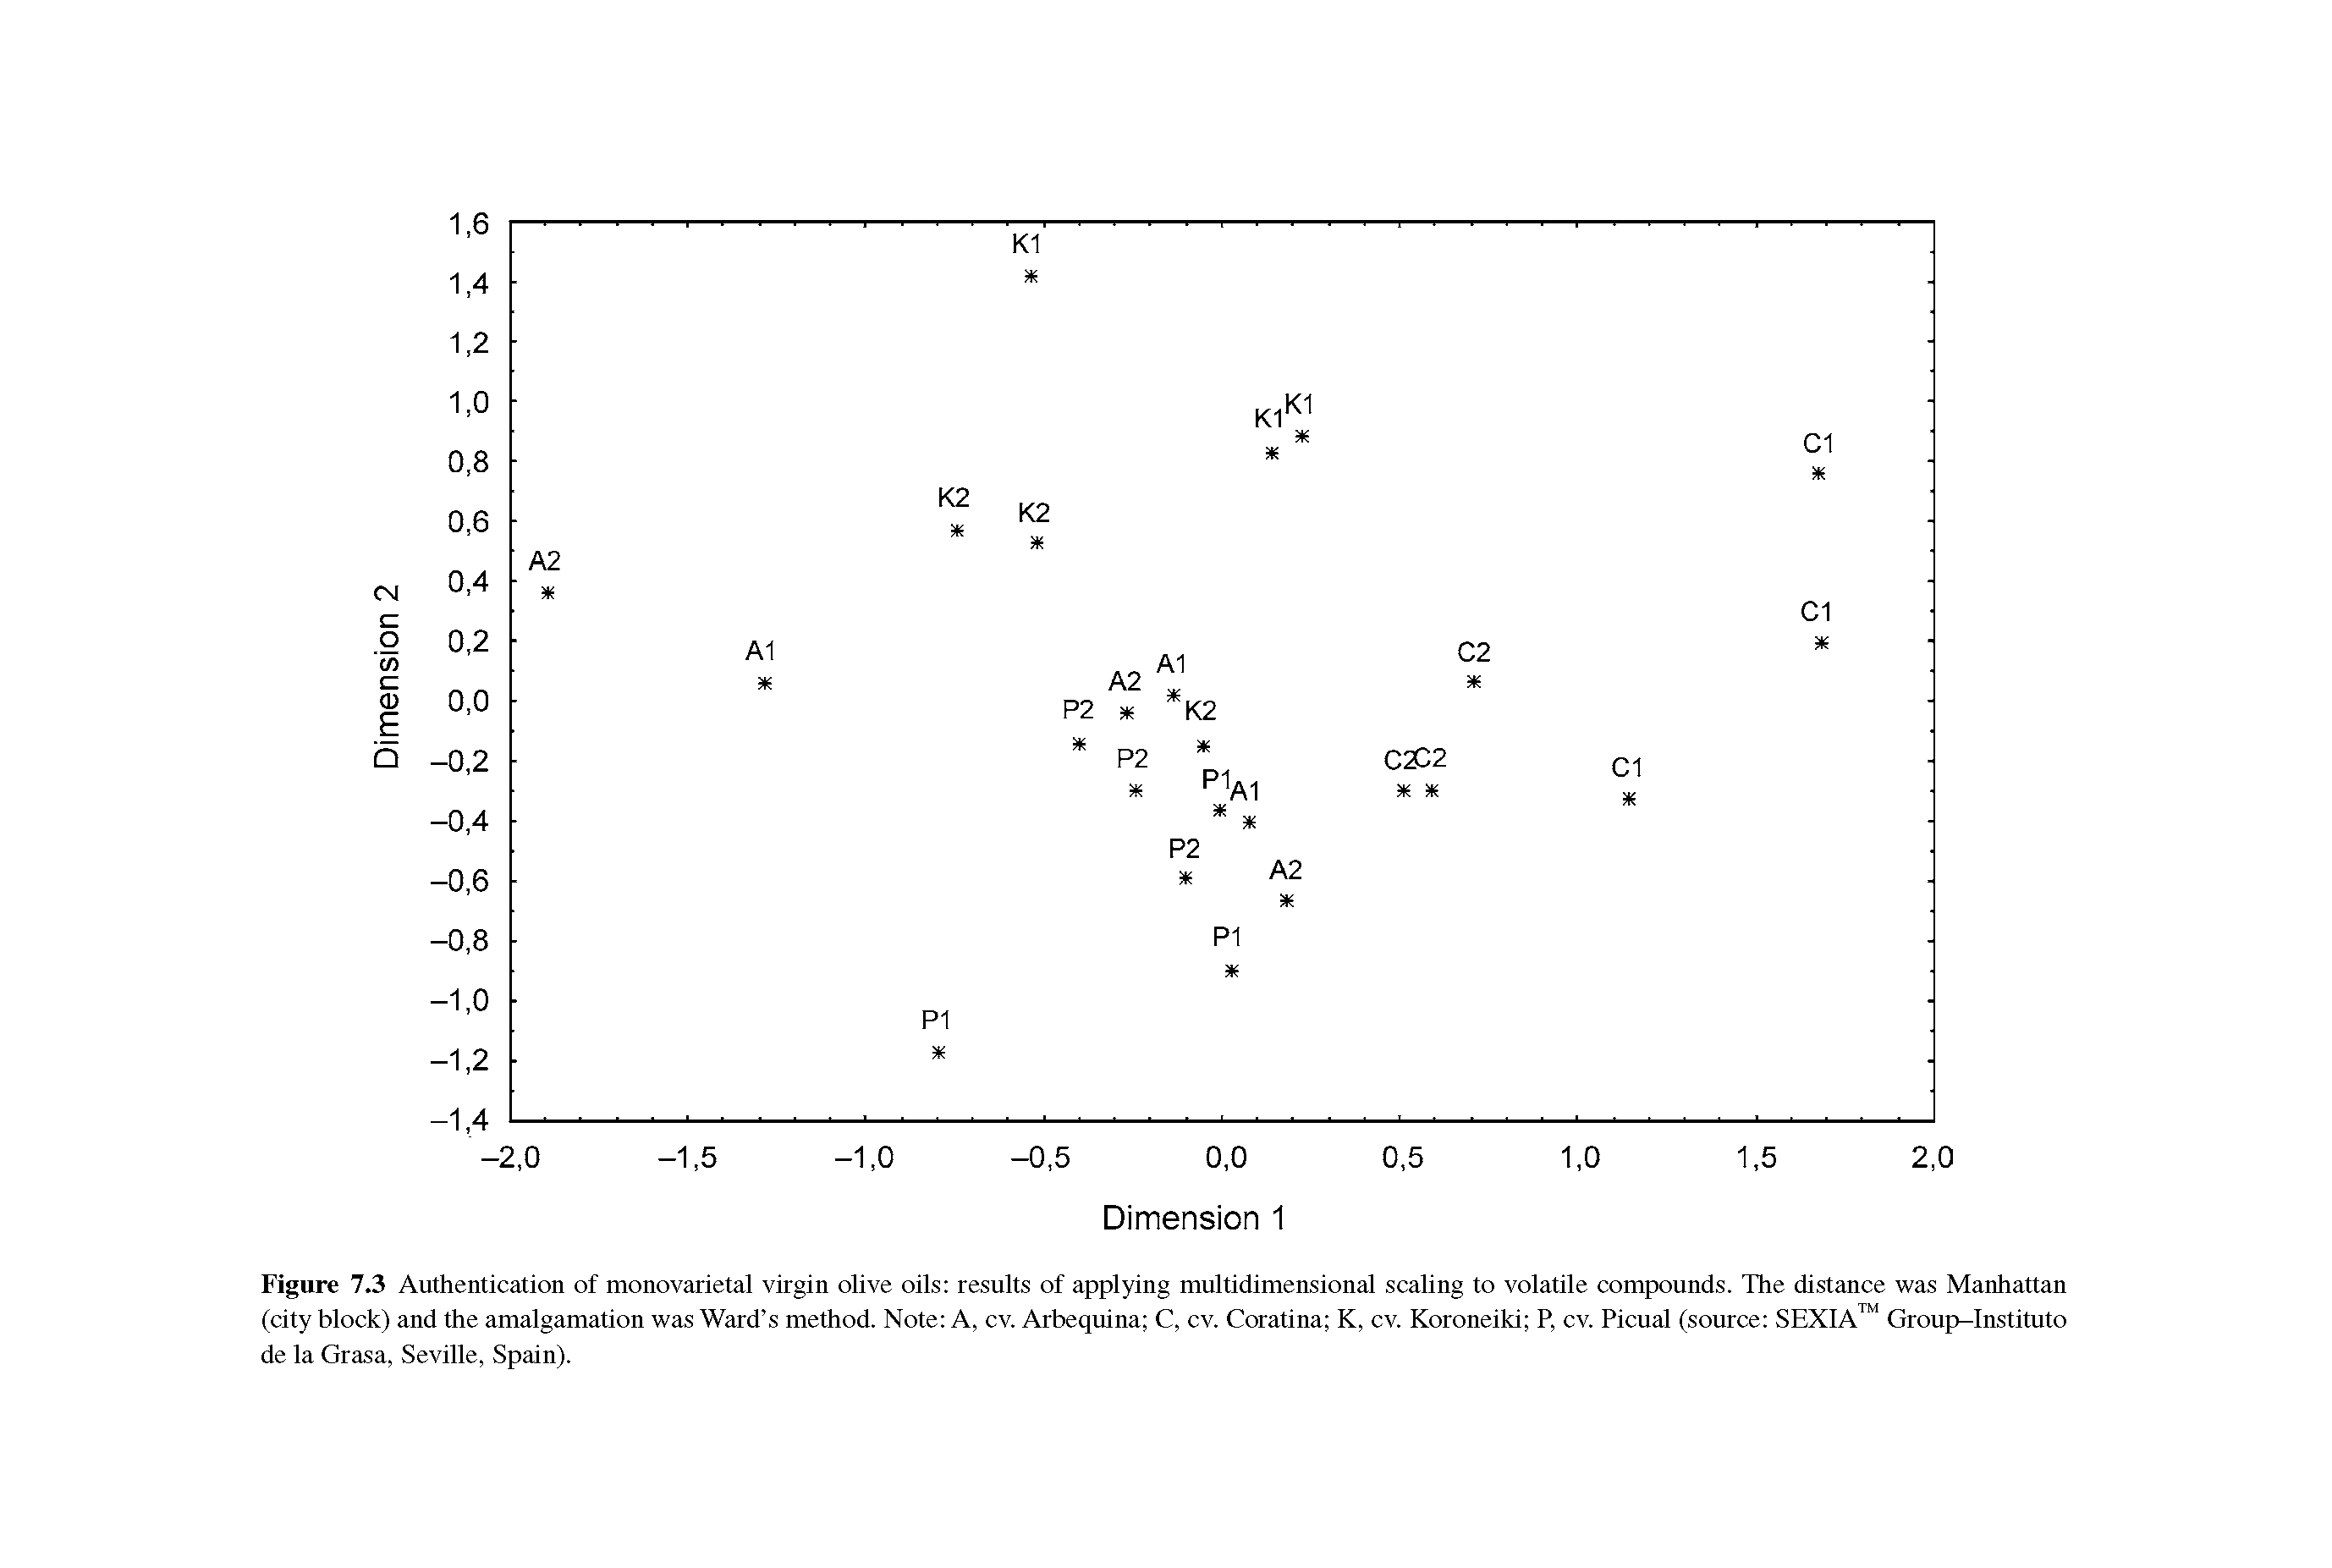 Figure 7.3 Authentication of monovarietal virgin olive oils results of applying multidimensional scaling to volatile compounds. The distance was Manhattan (city block) and the amalgamation was Ward s method. Note A, cv. Arbequina C, cv. Coratina K, cv. Koroneiki P, cv. Picual (source SEXIA Group-Instituto de la Grasa, Seville, Spain).